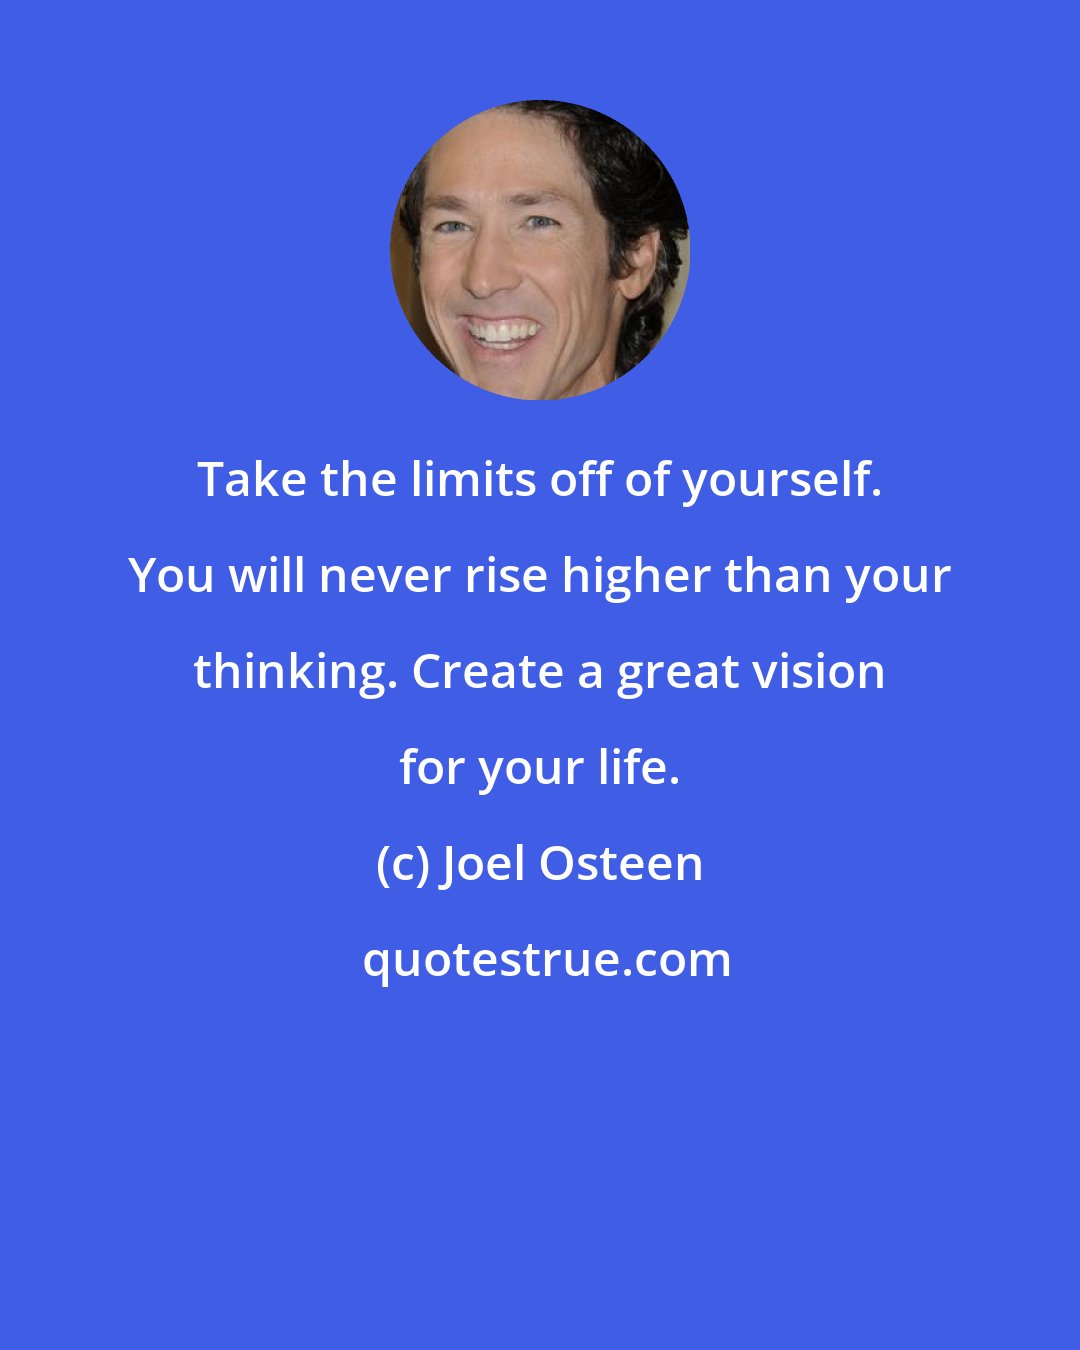 Joel Osteen: Take the limits off of yourself. You will never rise higher than your thinking. Create a great vision for your life.